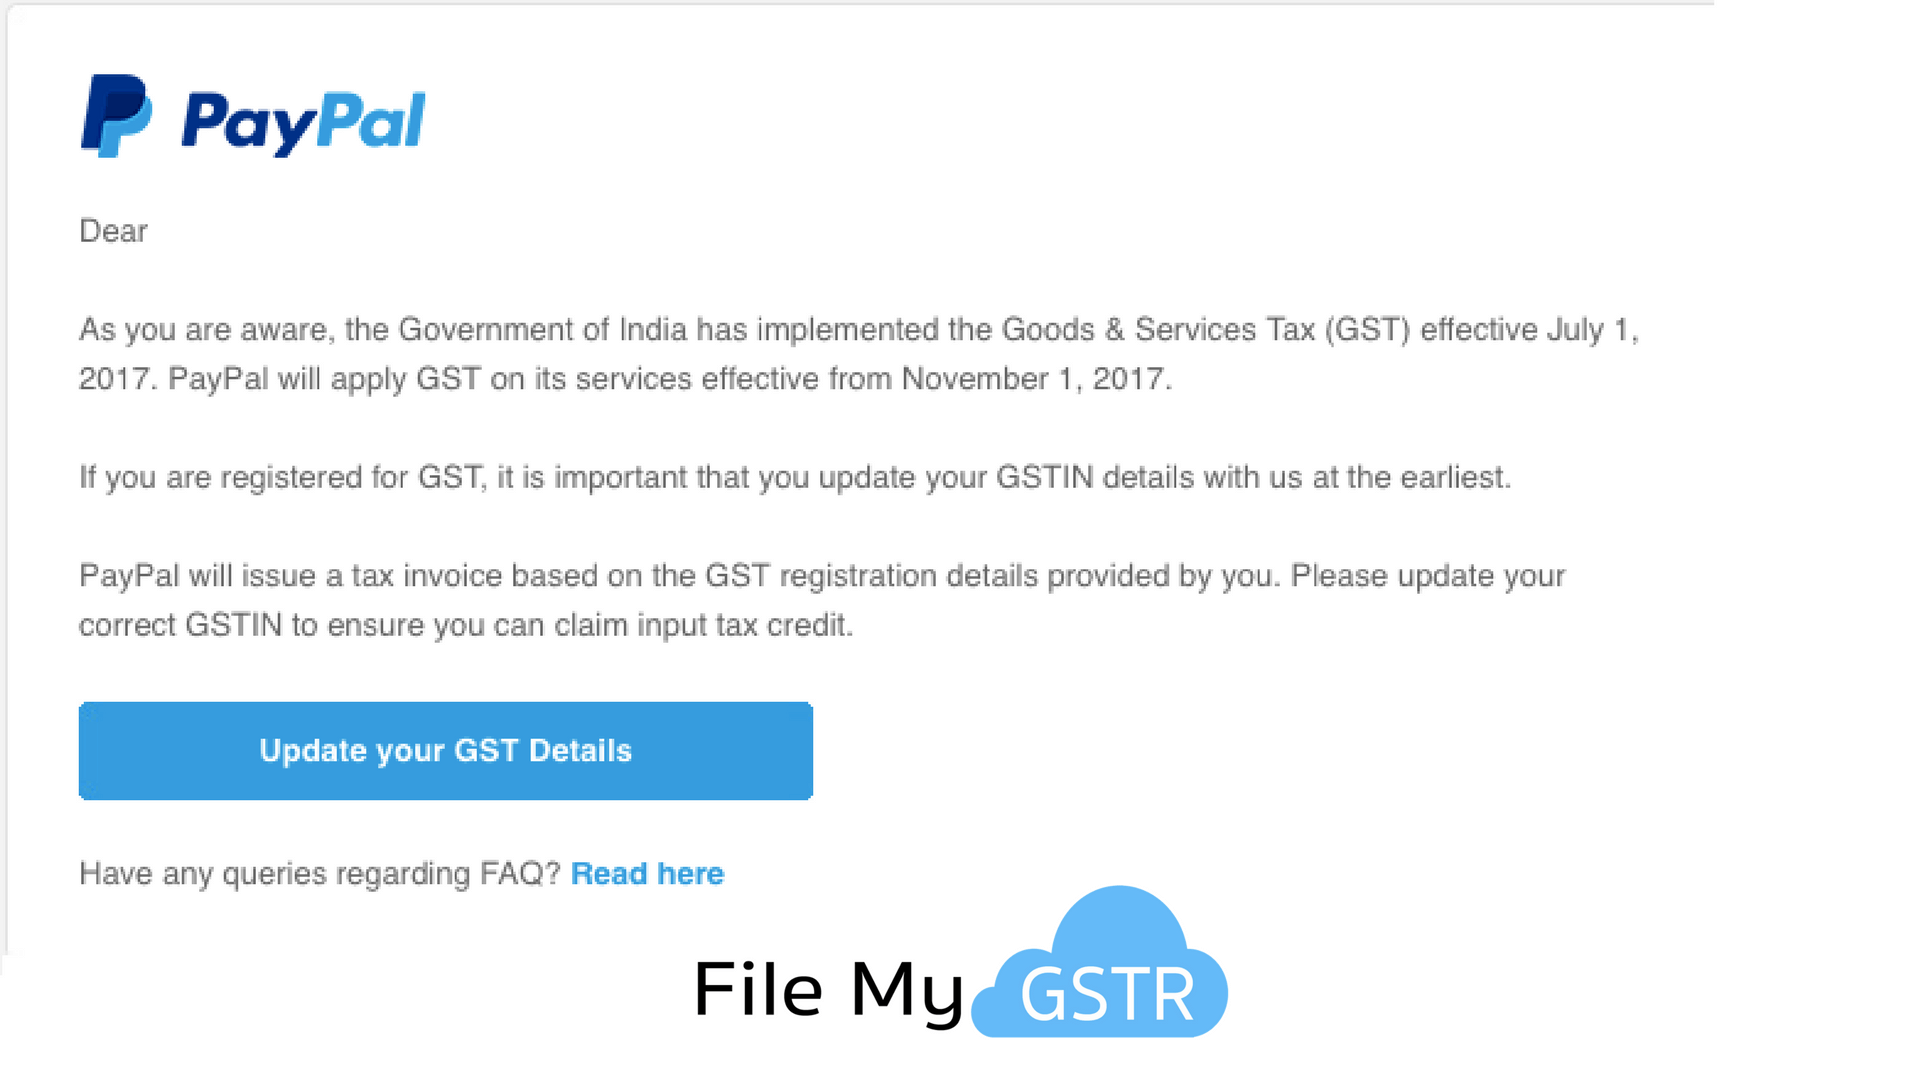 Update GSTIN Details With PayPal